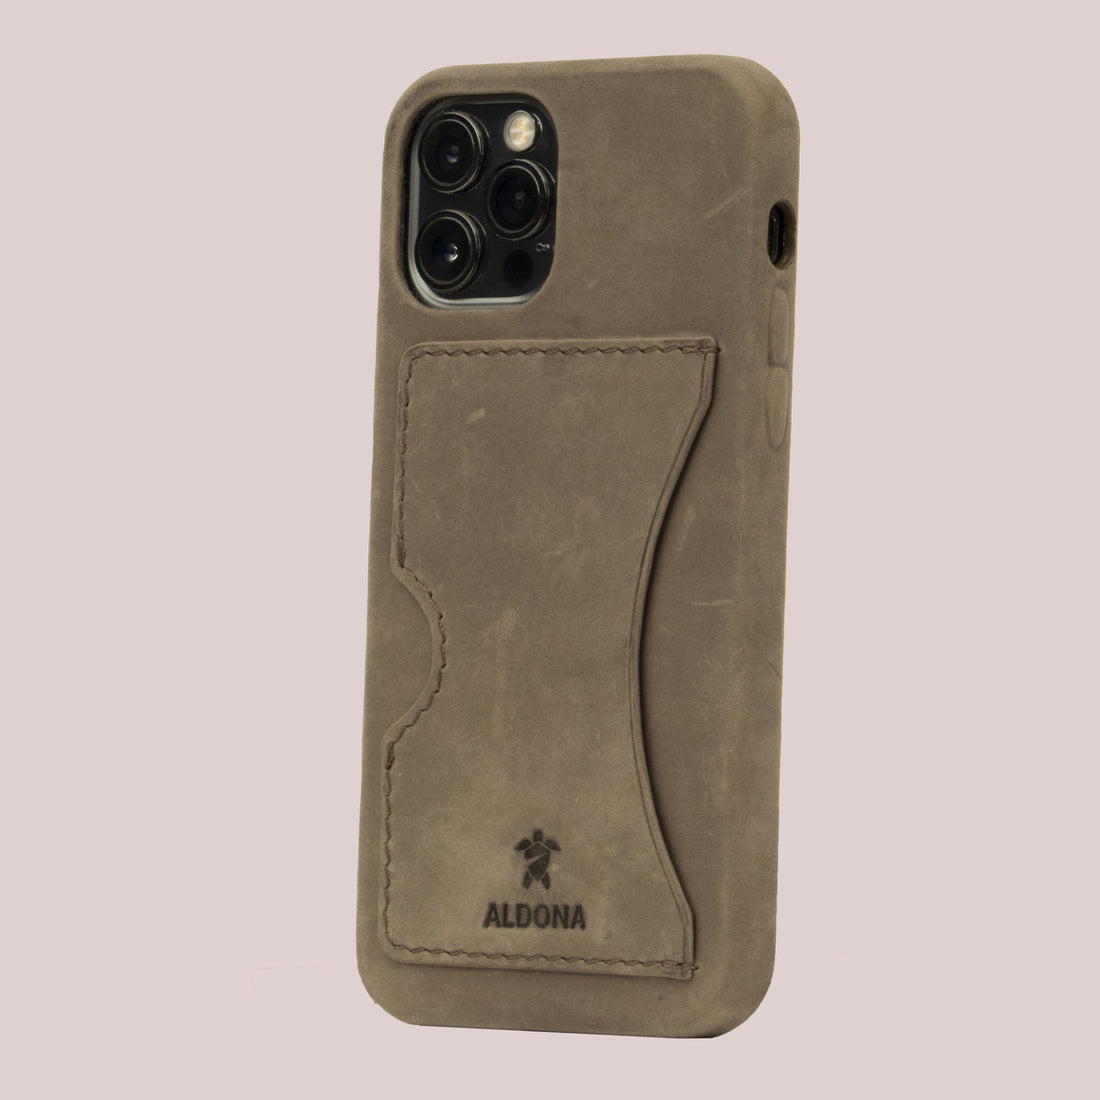 Baxter Card Case for iPhone 12 Pro - Burnt Tobacco